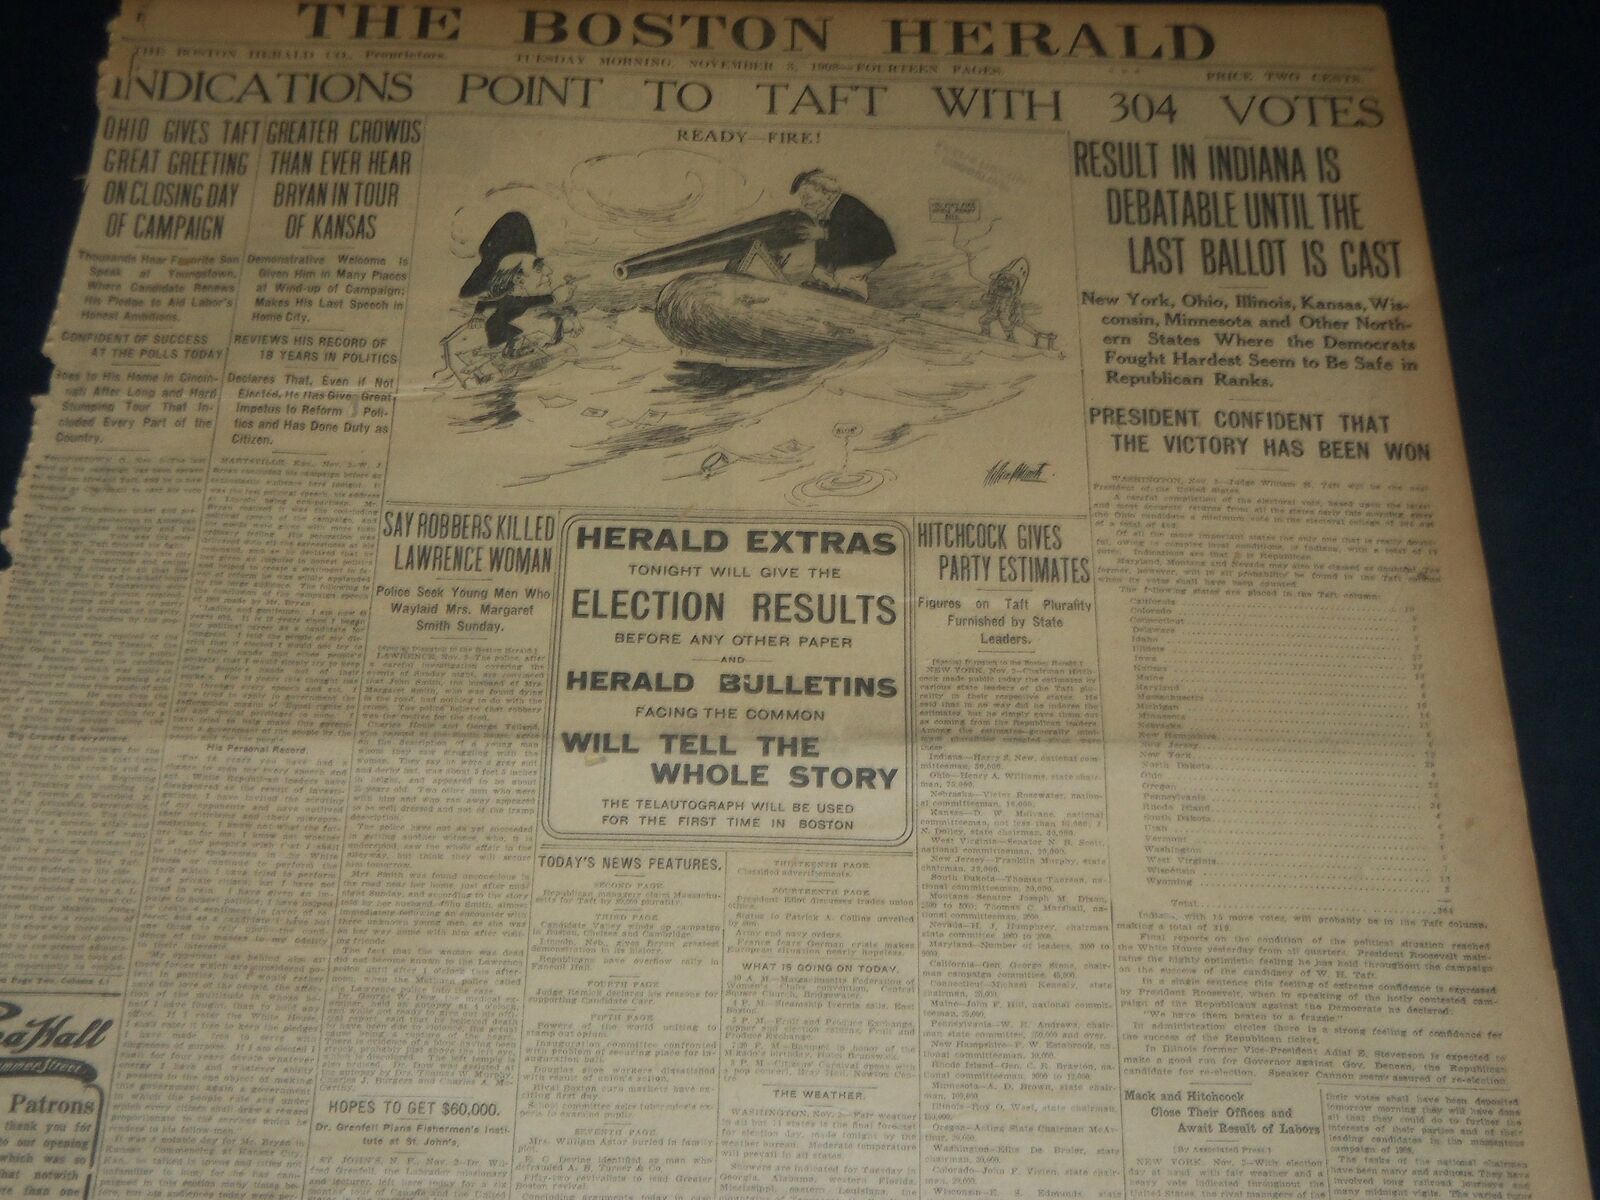 1908 NOV 3 THE BOSTON HERALD - INDICATIONS POINT TO TAFT WITH 304 VOTES - BH 240